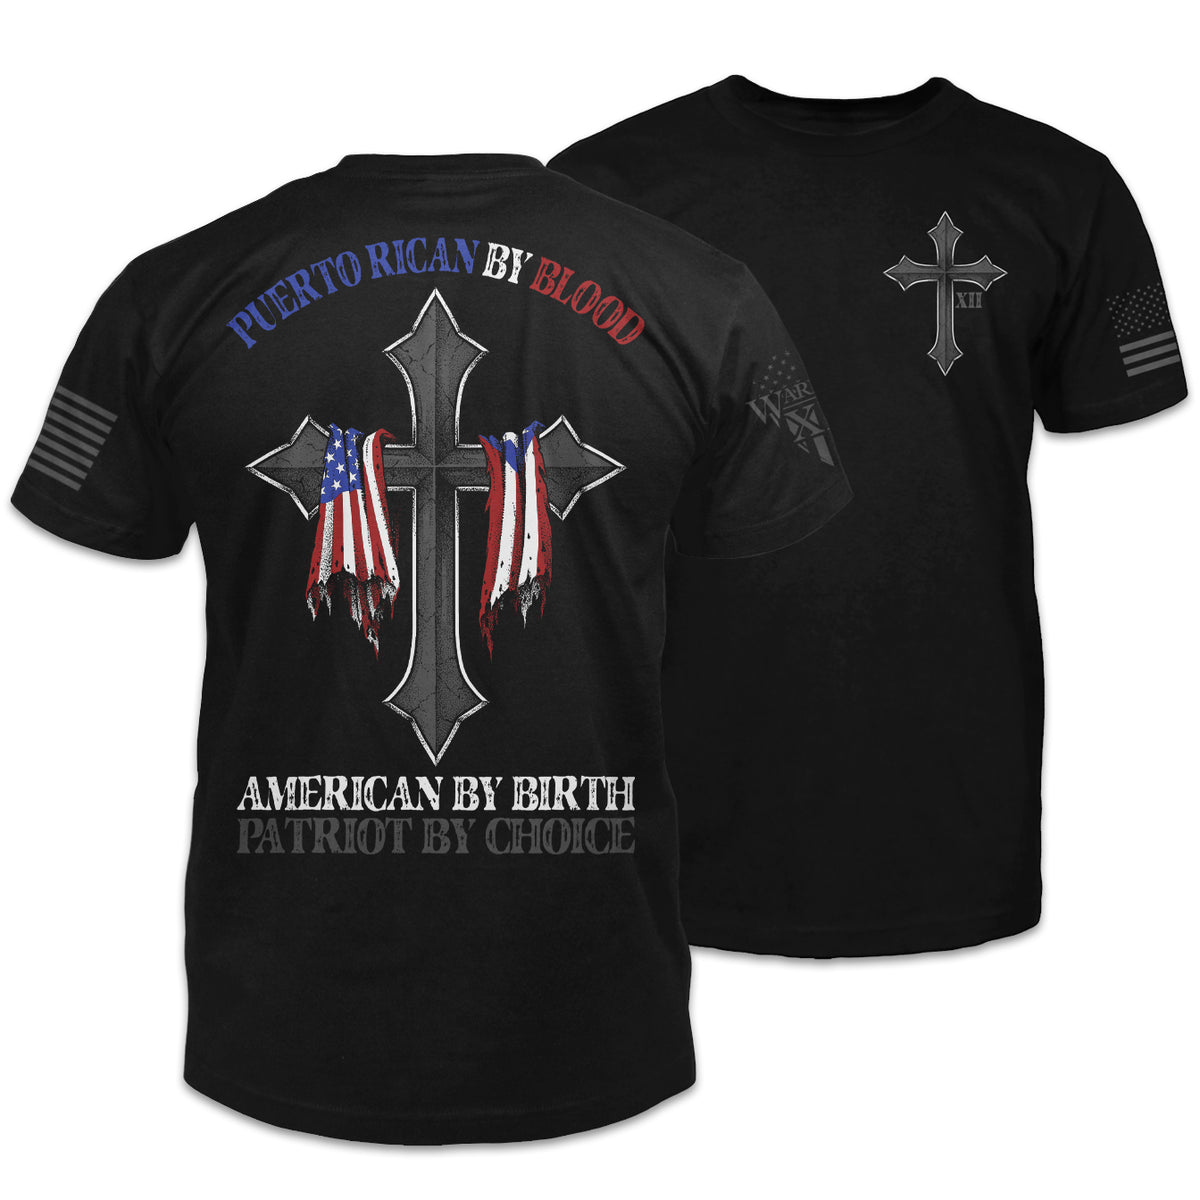 Front and back black t-shirt with the words "Puerto Rican By Blood" with a cross holding the American and Puerto Rican flags printed on the shirt.